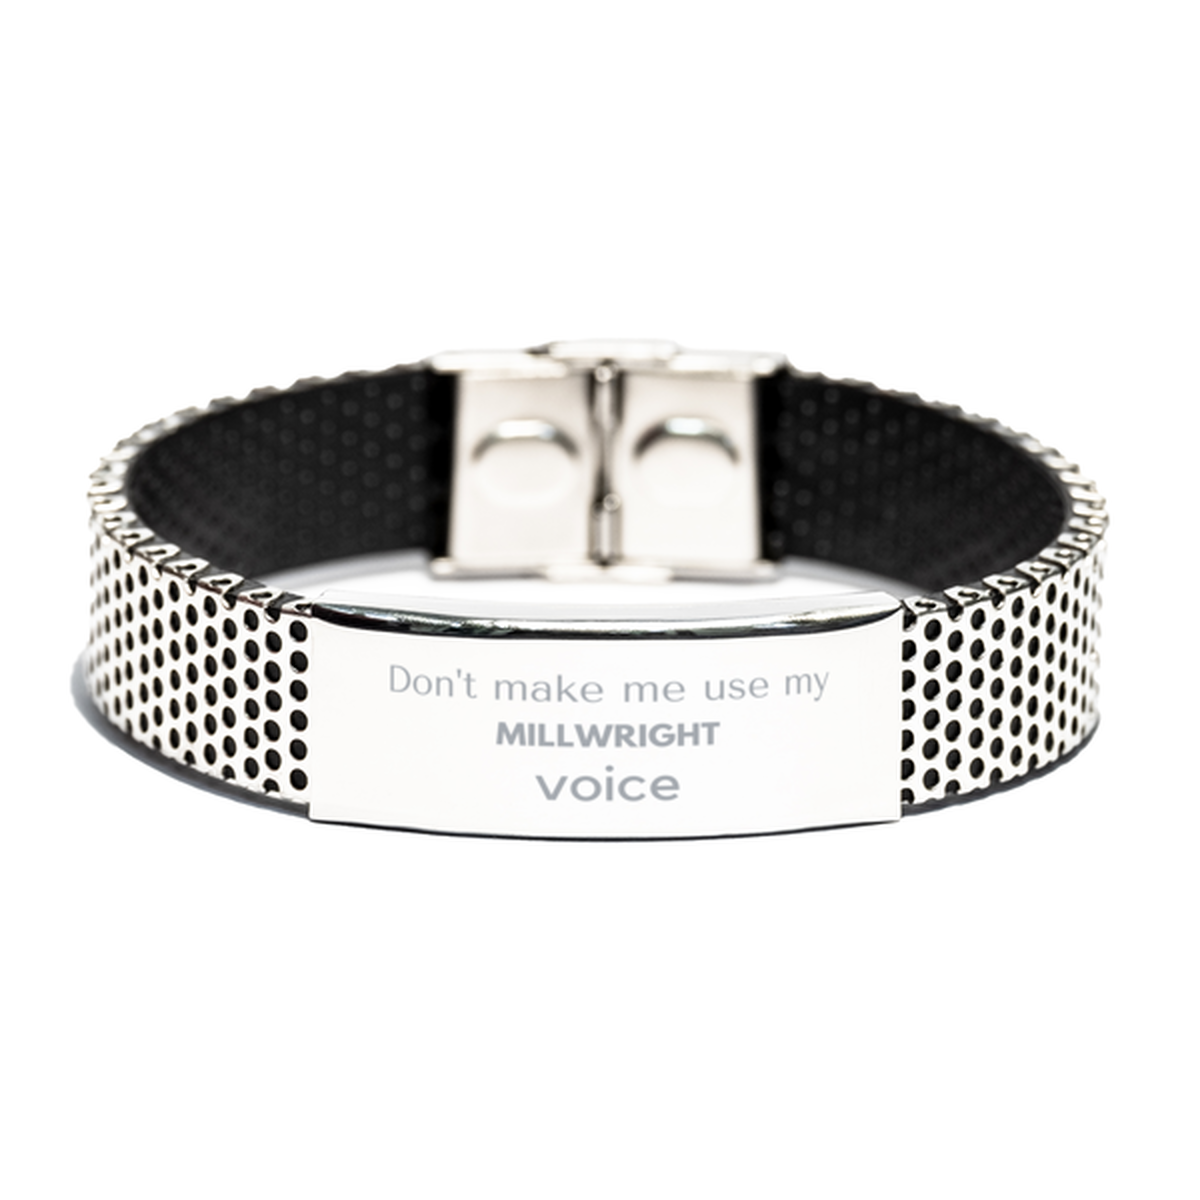 Don't make me use my Millwright voice, Sarcasm Millwright Gifts, Christmas Millwright Stainless Steel Bracelet Birthday Unique Gifts For Millwright Coworkers, Men, Women, Colleague, Friends